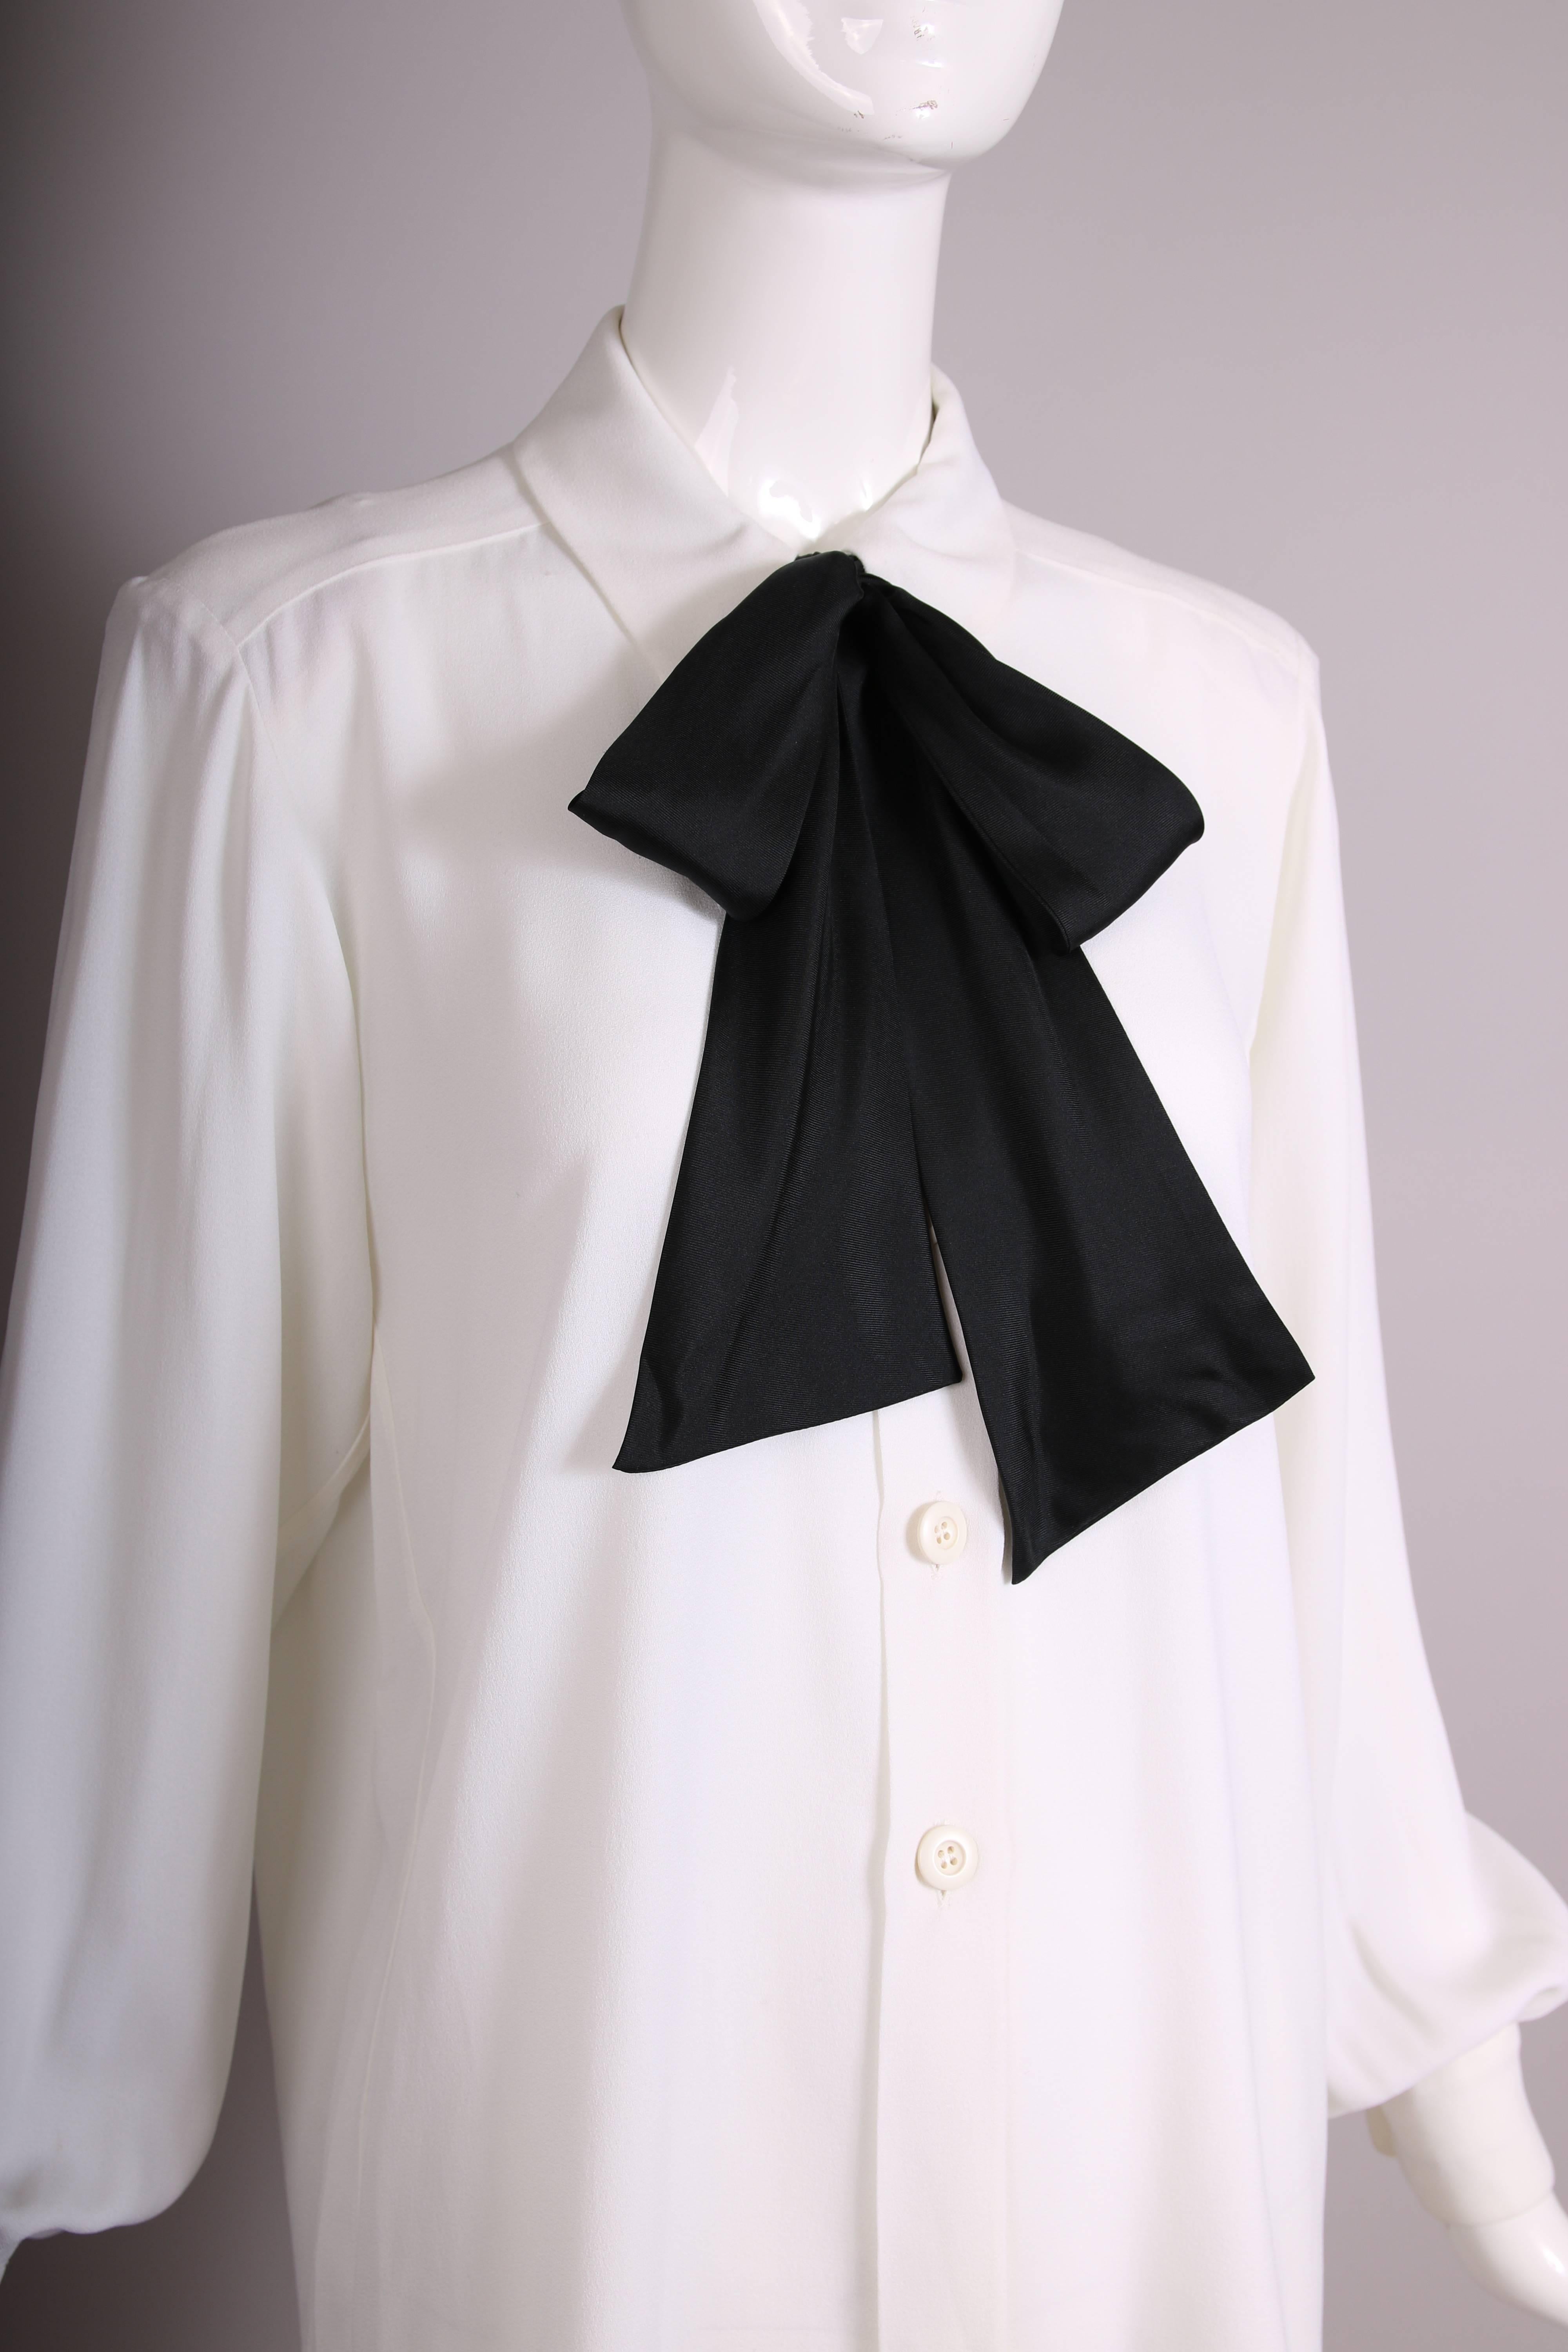 white shirt with black bow